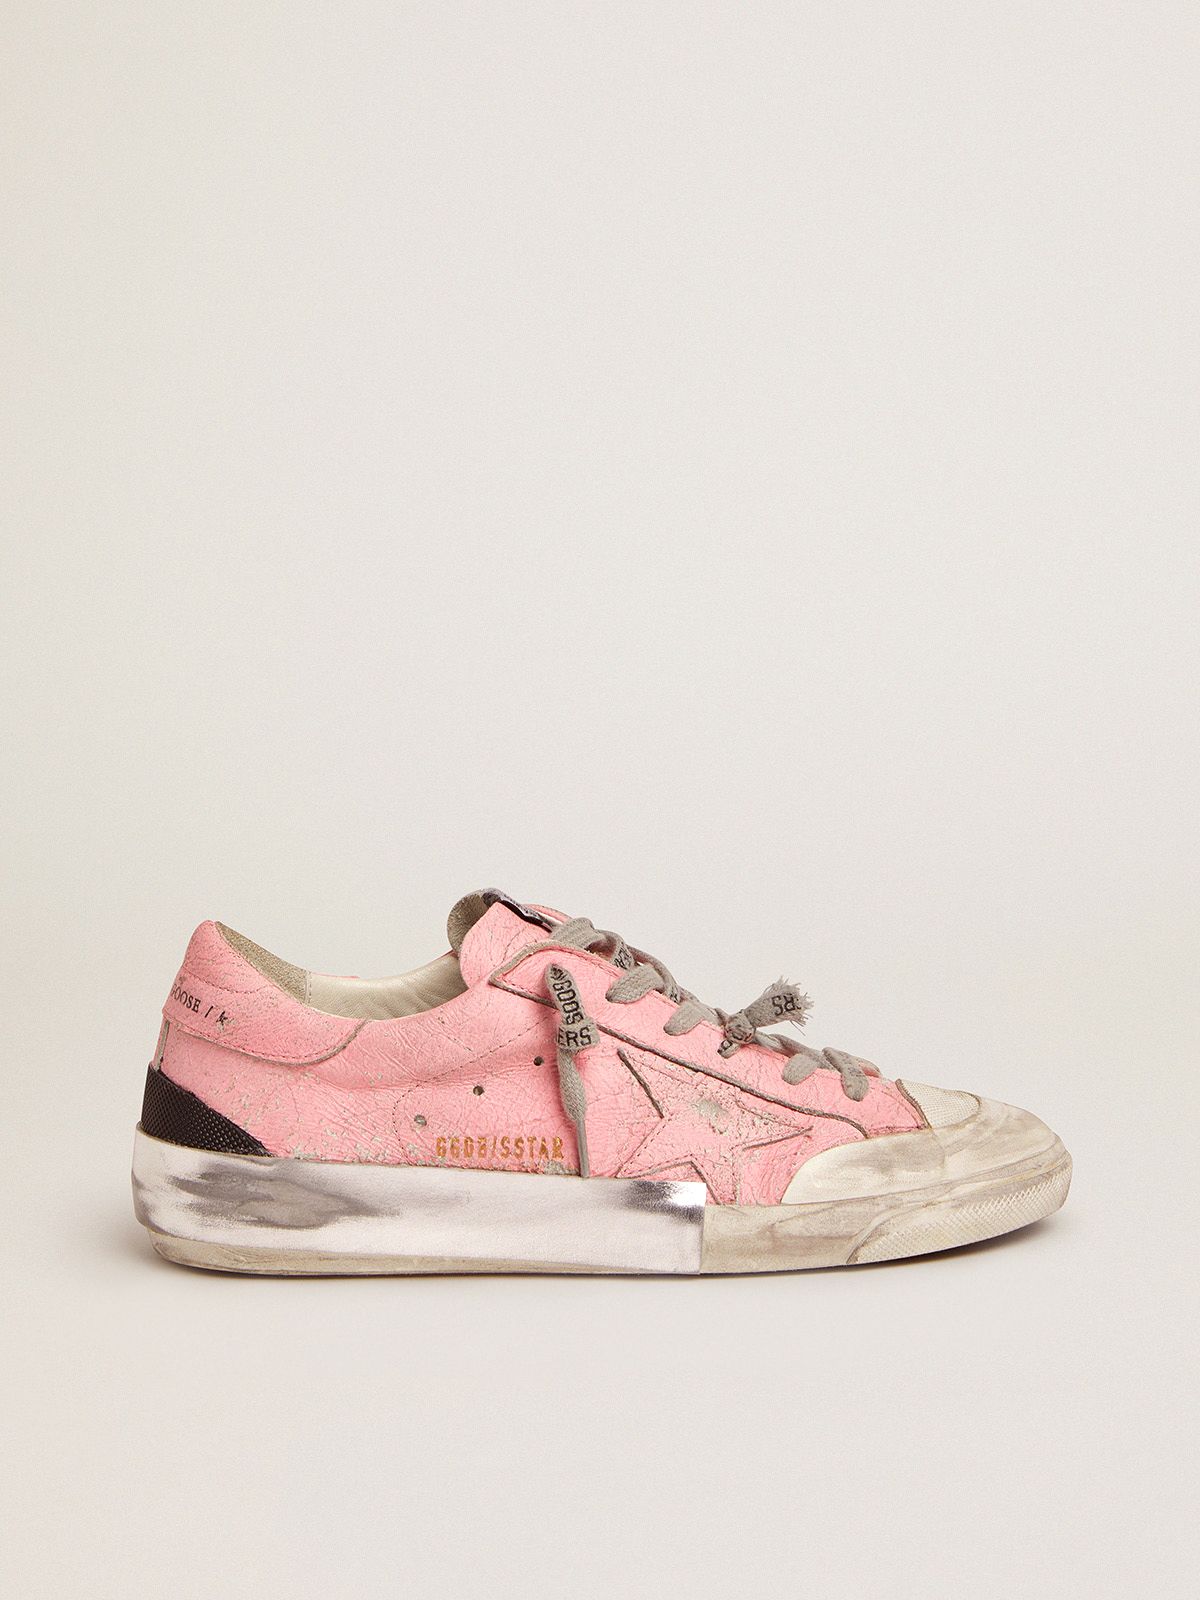 Sneakers Uomo Golden Goose Super-Star sneakers in pink crackled leather and multi-foxing